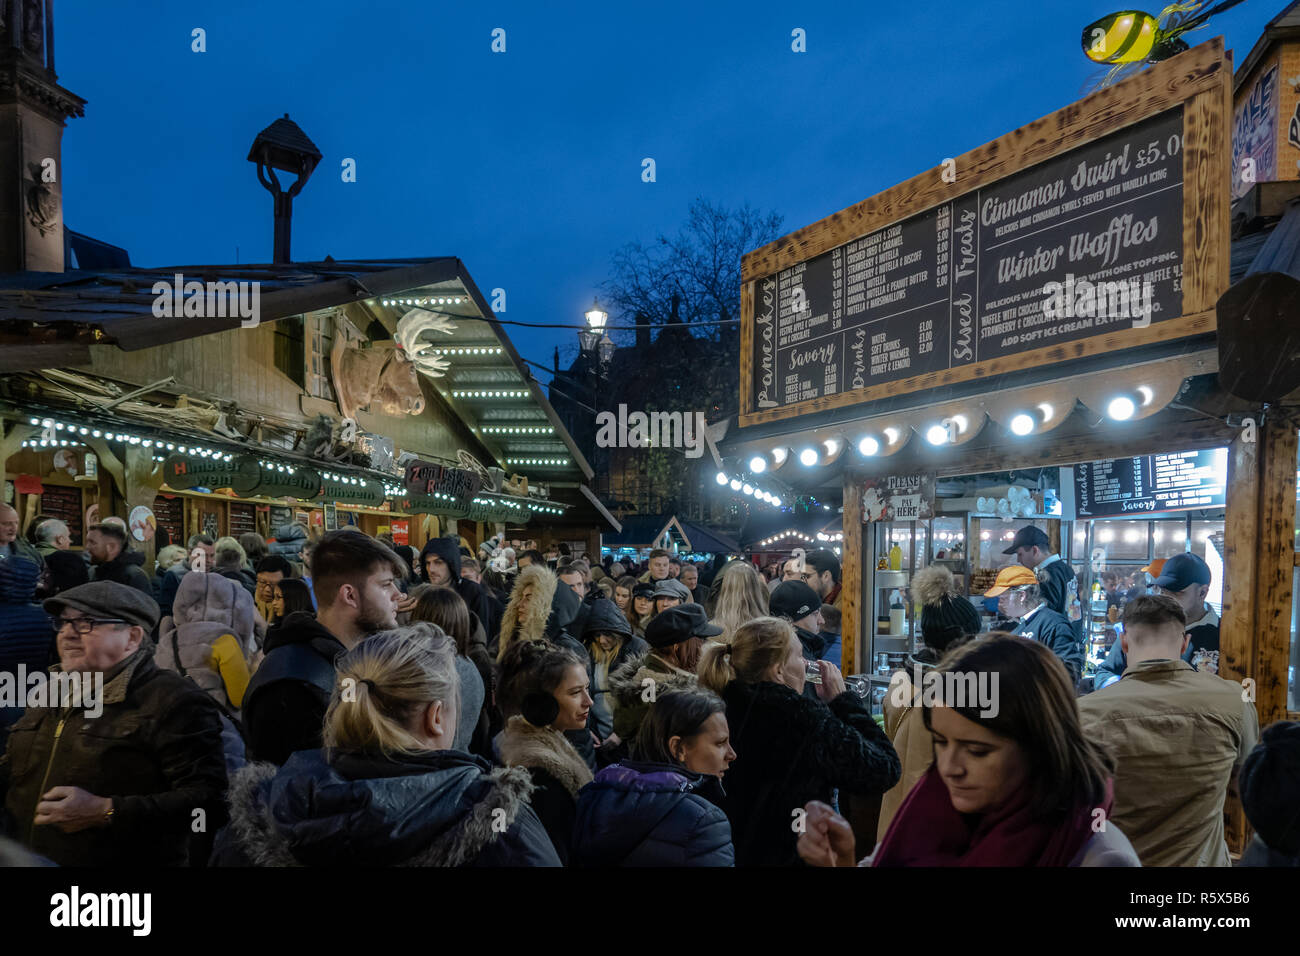 02 December 2018, Manchester Christmas Market. Zum Lustigen Rudolph ) bar and a Pancake Waffle Bar selling food and dring to festive shoppers. Stock Photo